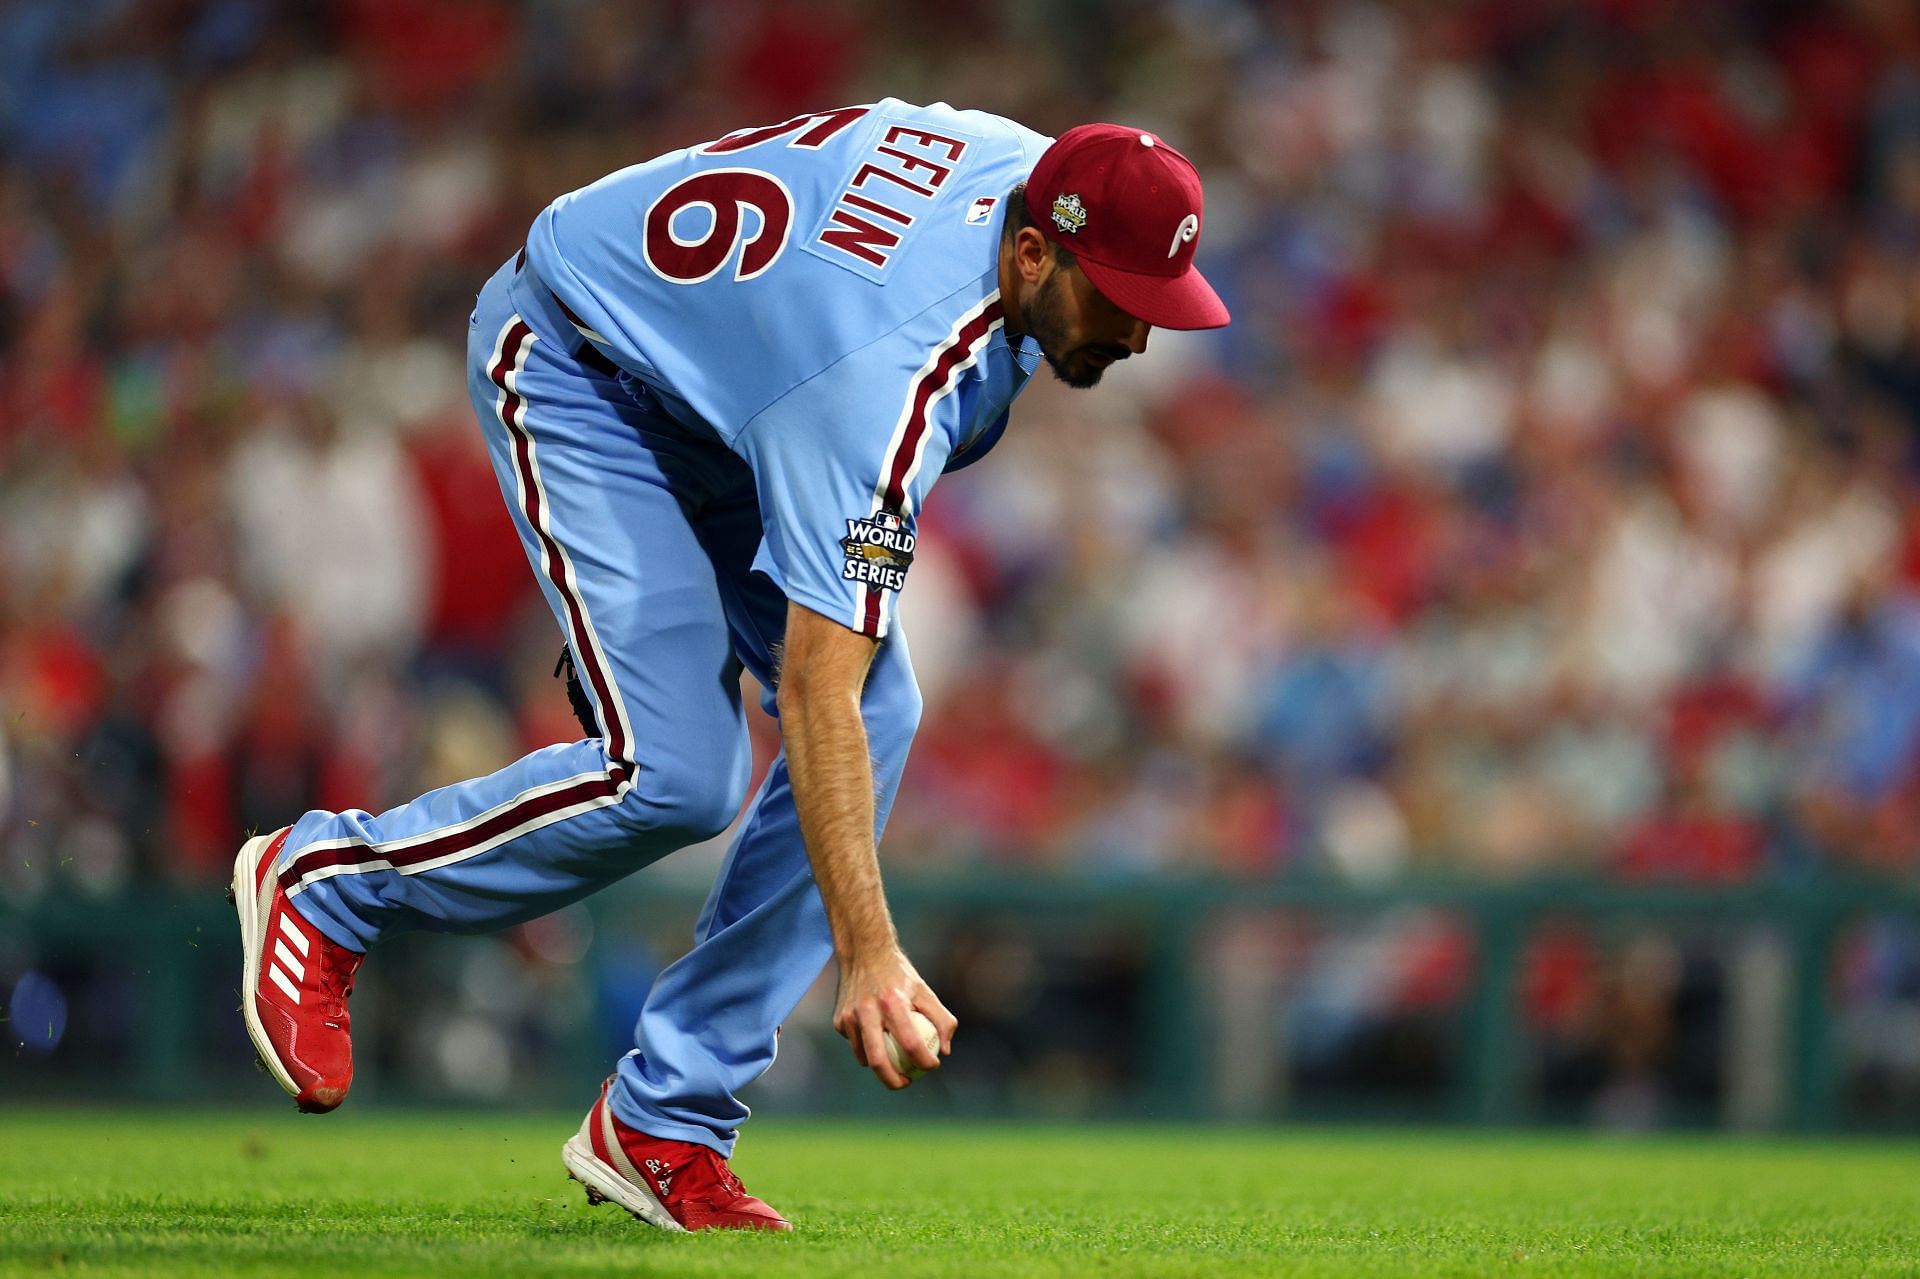 MLB free agency: Zach Eflin declines option with Phillies to become free  agent